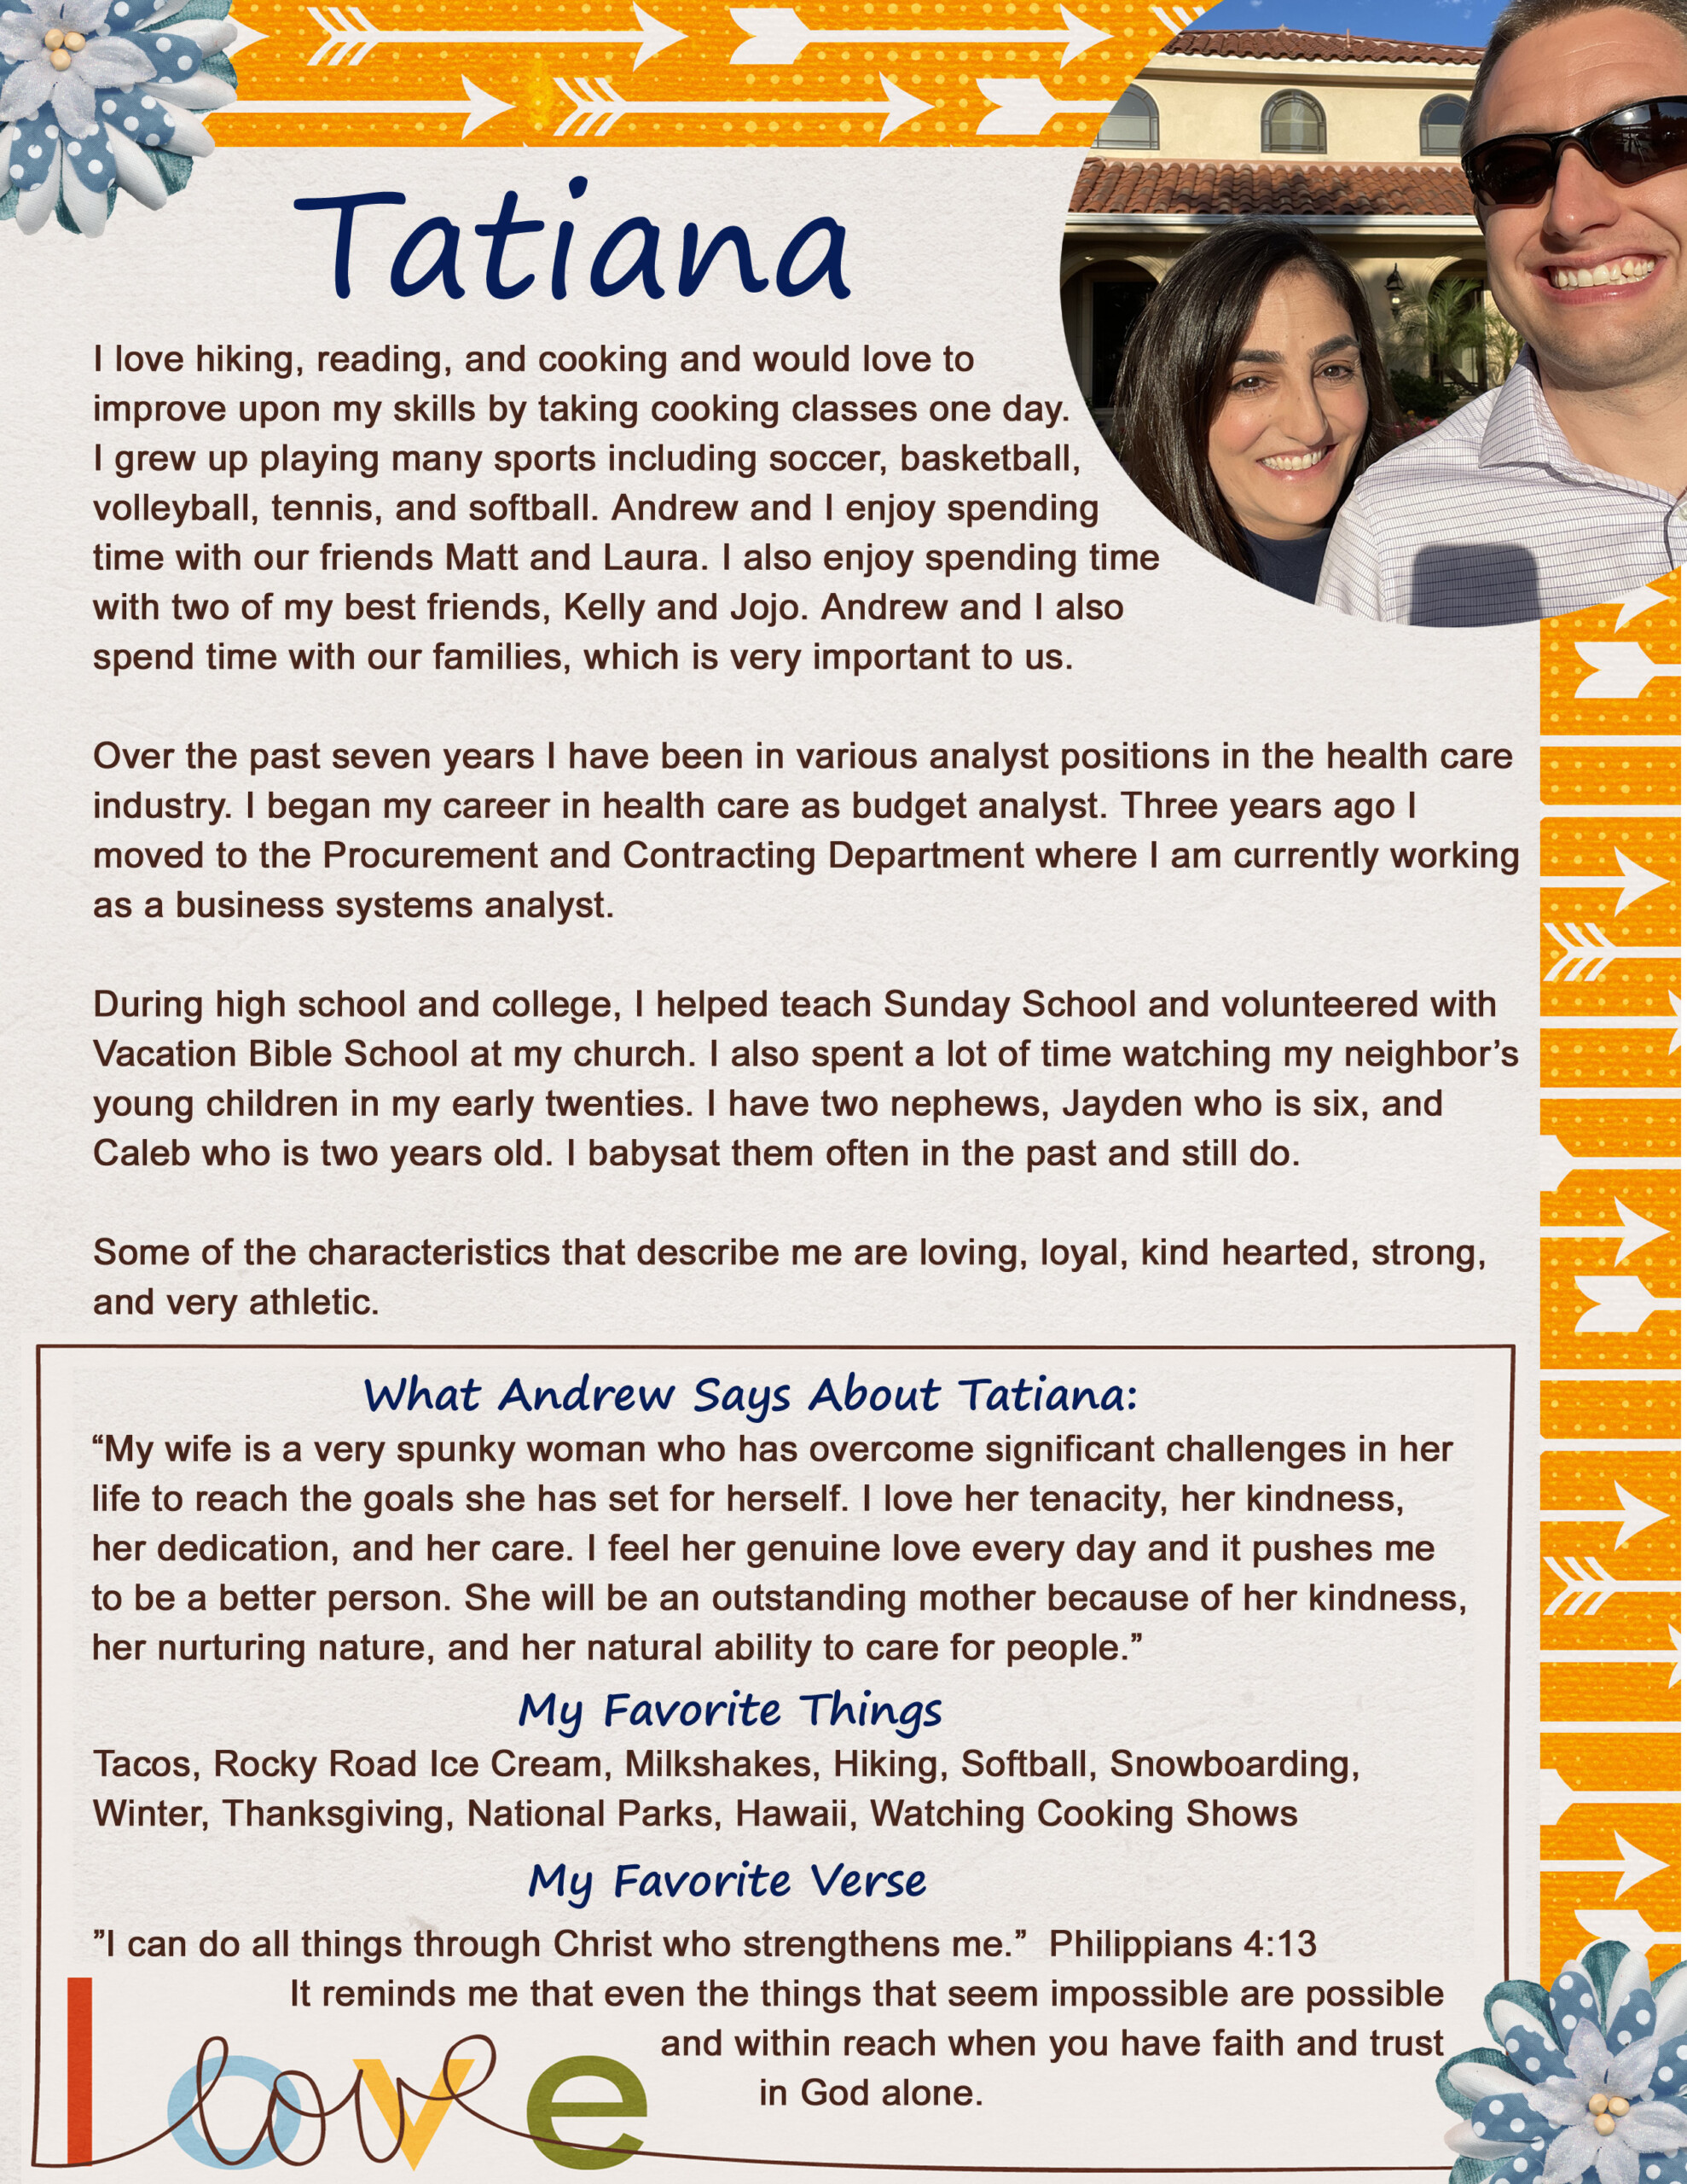 Andrew and Tatiana want to adopt